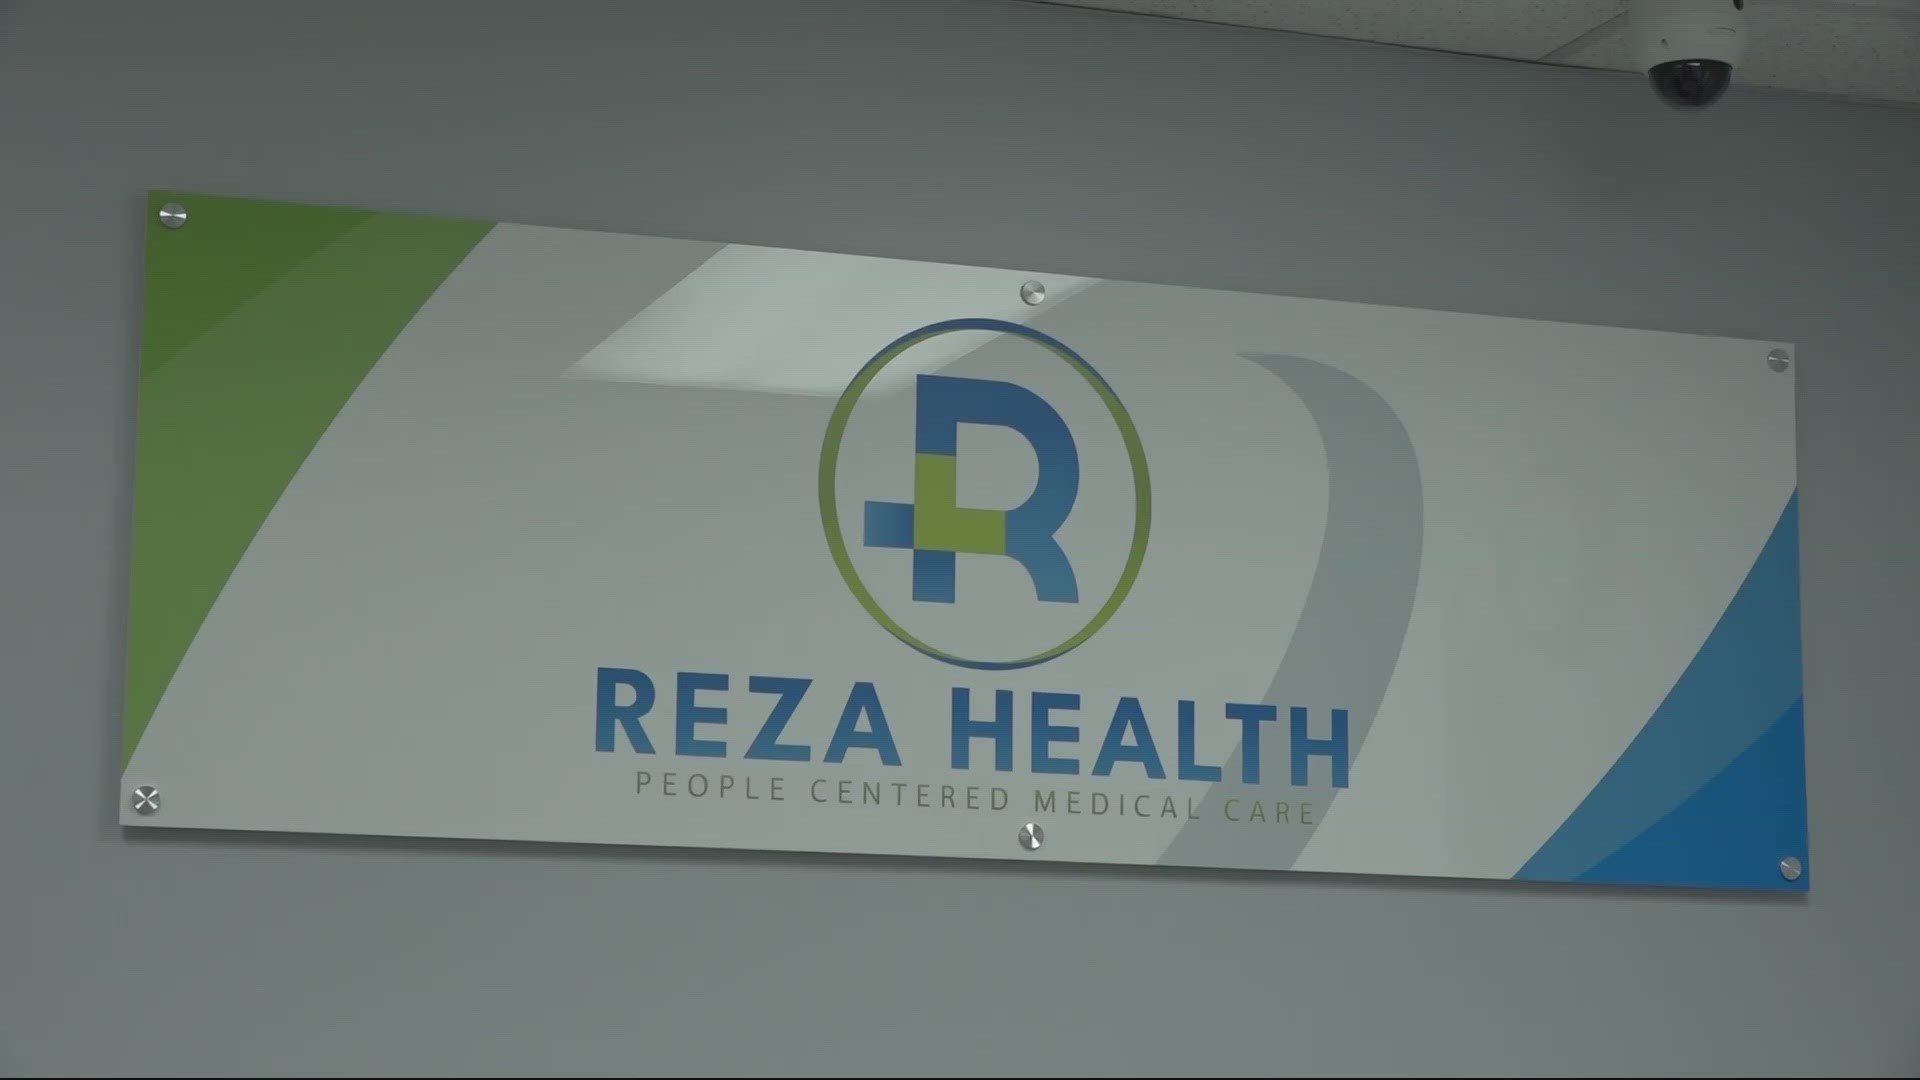 Reza Health is a people centered medical facility and the doctors say they’re providing long-term care to patients who may not otherwise have access.